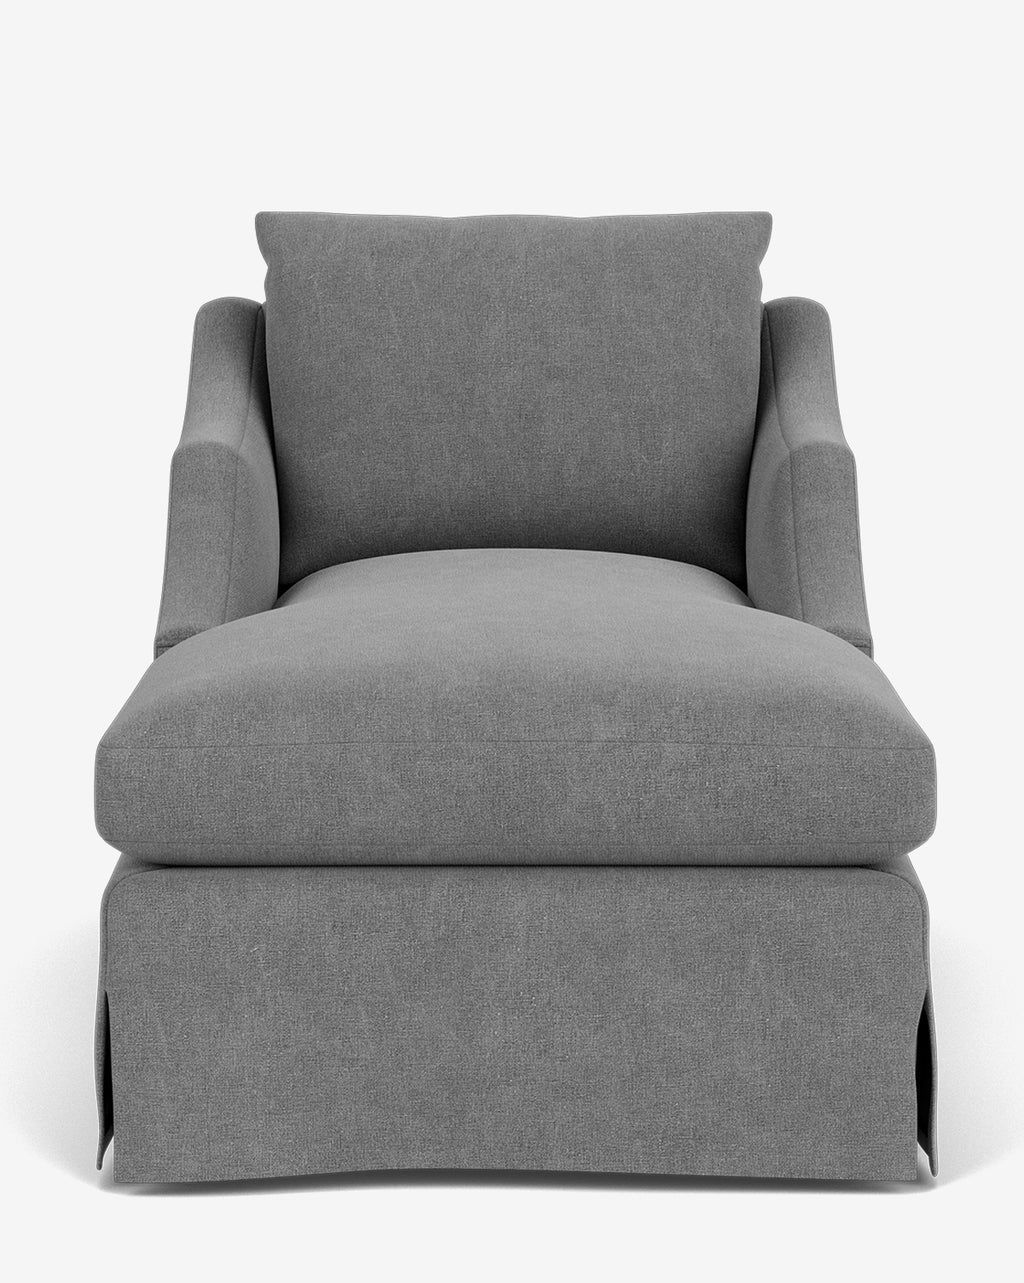 Everleigh Slipcover Chaise Lounge | McGee & Co.